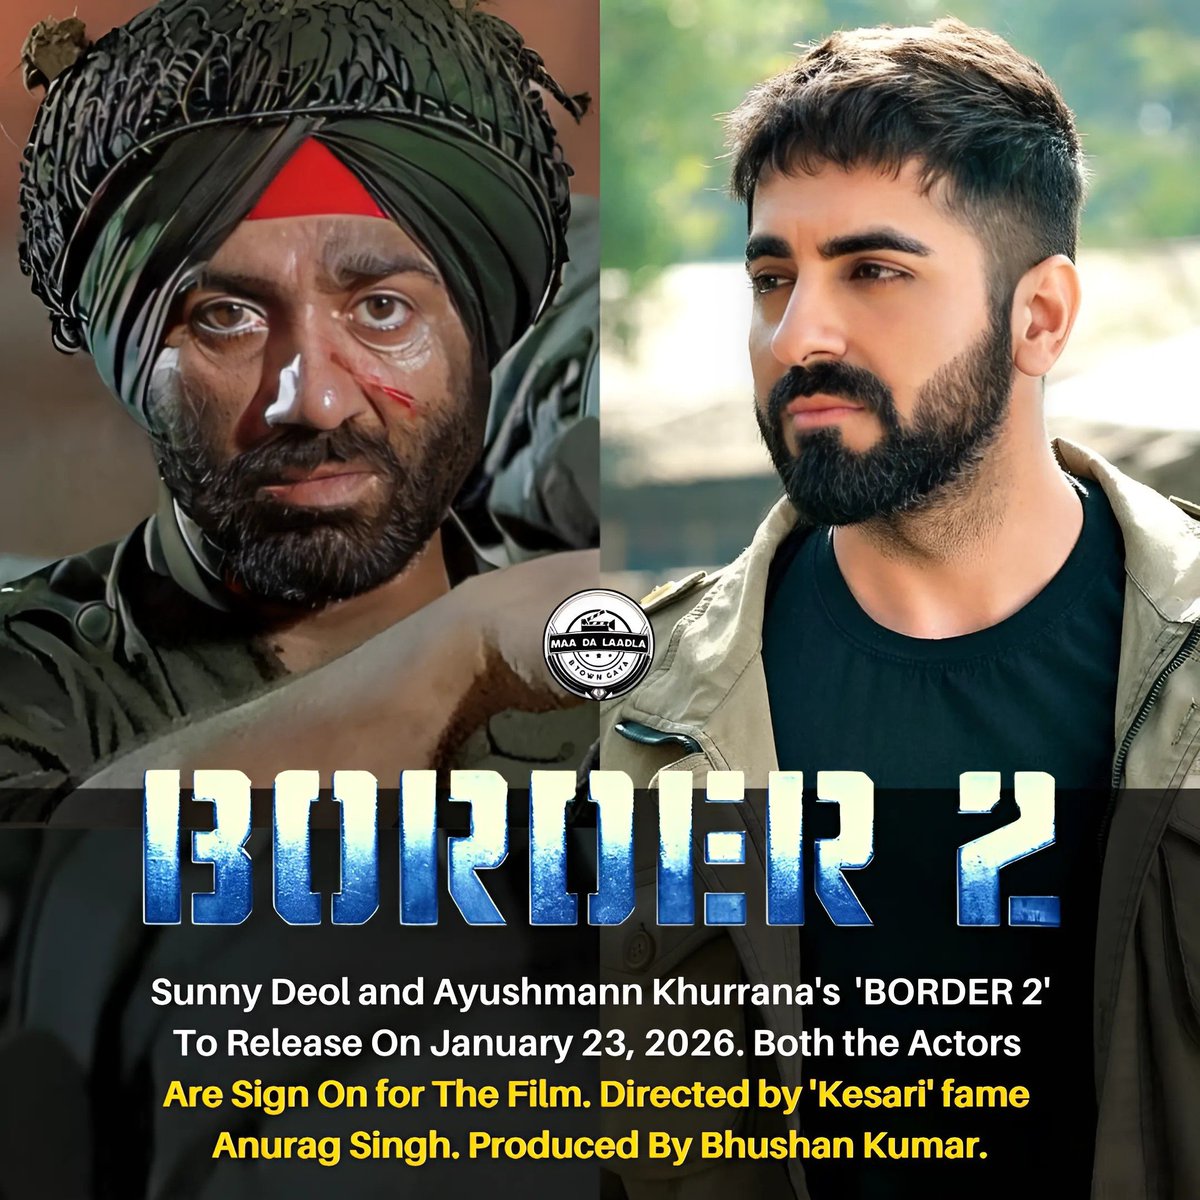 #Border2 is expected to be the largest #WarFilm in #IndianCinema History. 🔥🔥🔥

The Creators will spare no effort to create a film that honours the memory of the first one. The film has been a work in progress for more than a year, and writers have cracked screenplay that live